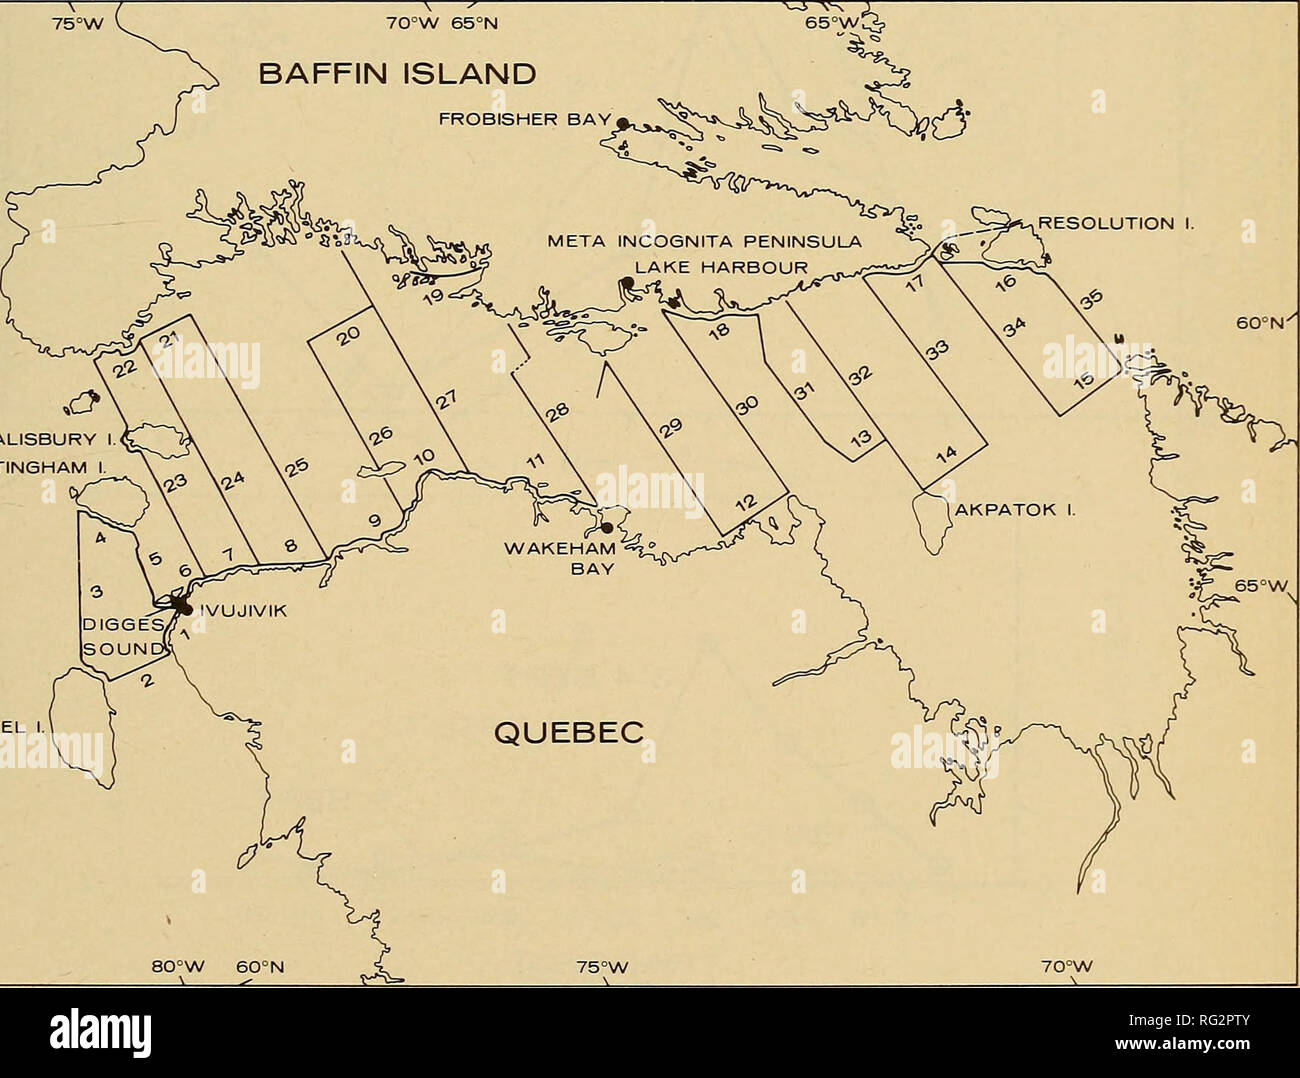 . The Canadian field-naturalist. 1982 Gaston: Migration of Juvenile Murres 31 Table 1. Transects and distances flown and numbers of Thick-billed Murres recorded within 200 m of the line of flight, during 5 surveys in September 1980. Murres Observed Date Transects Distance Unaccompanied Adult-chick De isity of Adult Flown Adults pairs ch ck pairs/km^ 362 336 36 0.25 538 718 319 1.48 115 8 0 0 363 188 60 0.41 339 0 0 0 766 34 16 0.05 139 12 5 0.09 632 236 123 0.49 255 4 0 0 603 81 43 0.18 3 Sept. coastal 1,4,6,7,22 offshore 2,3,5,23,24 4 Sept. coastal 11 offshore 25,27,28 9 Sept. coastal 8,9,10, Stock Photo